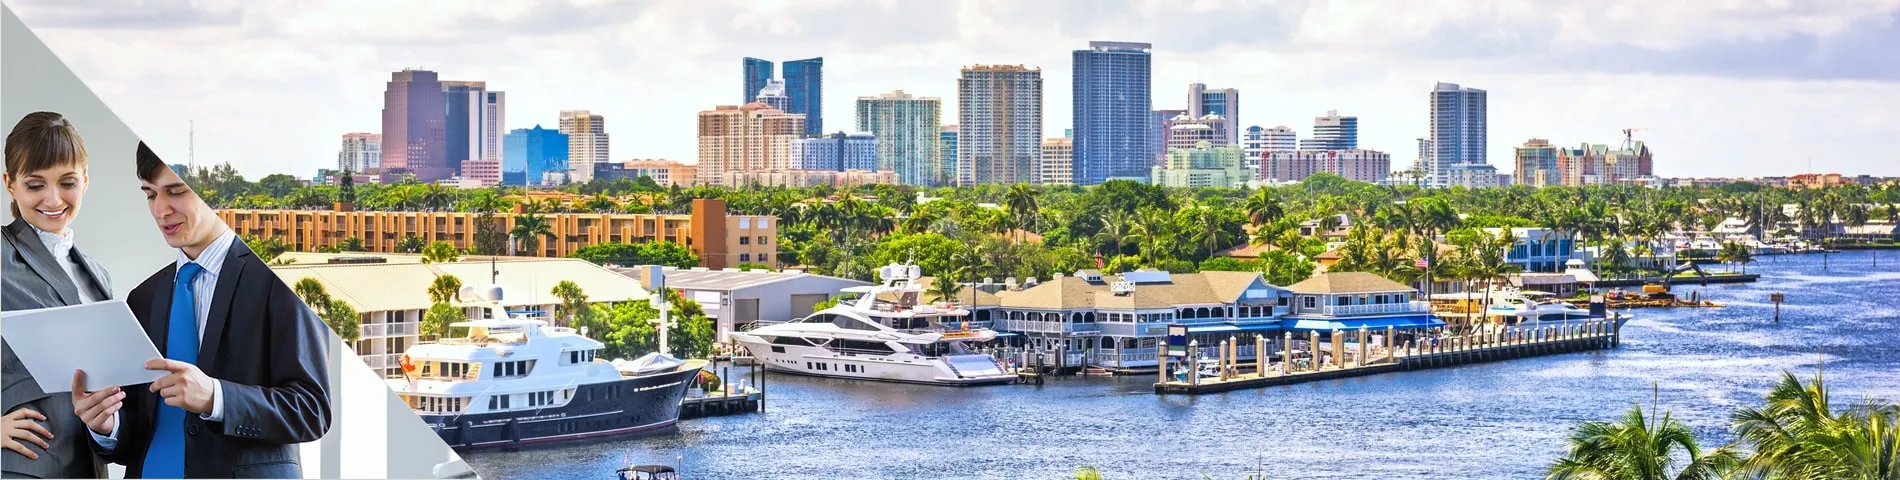 Fort Lauderdale - Business Individuale